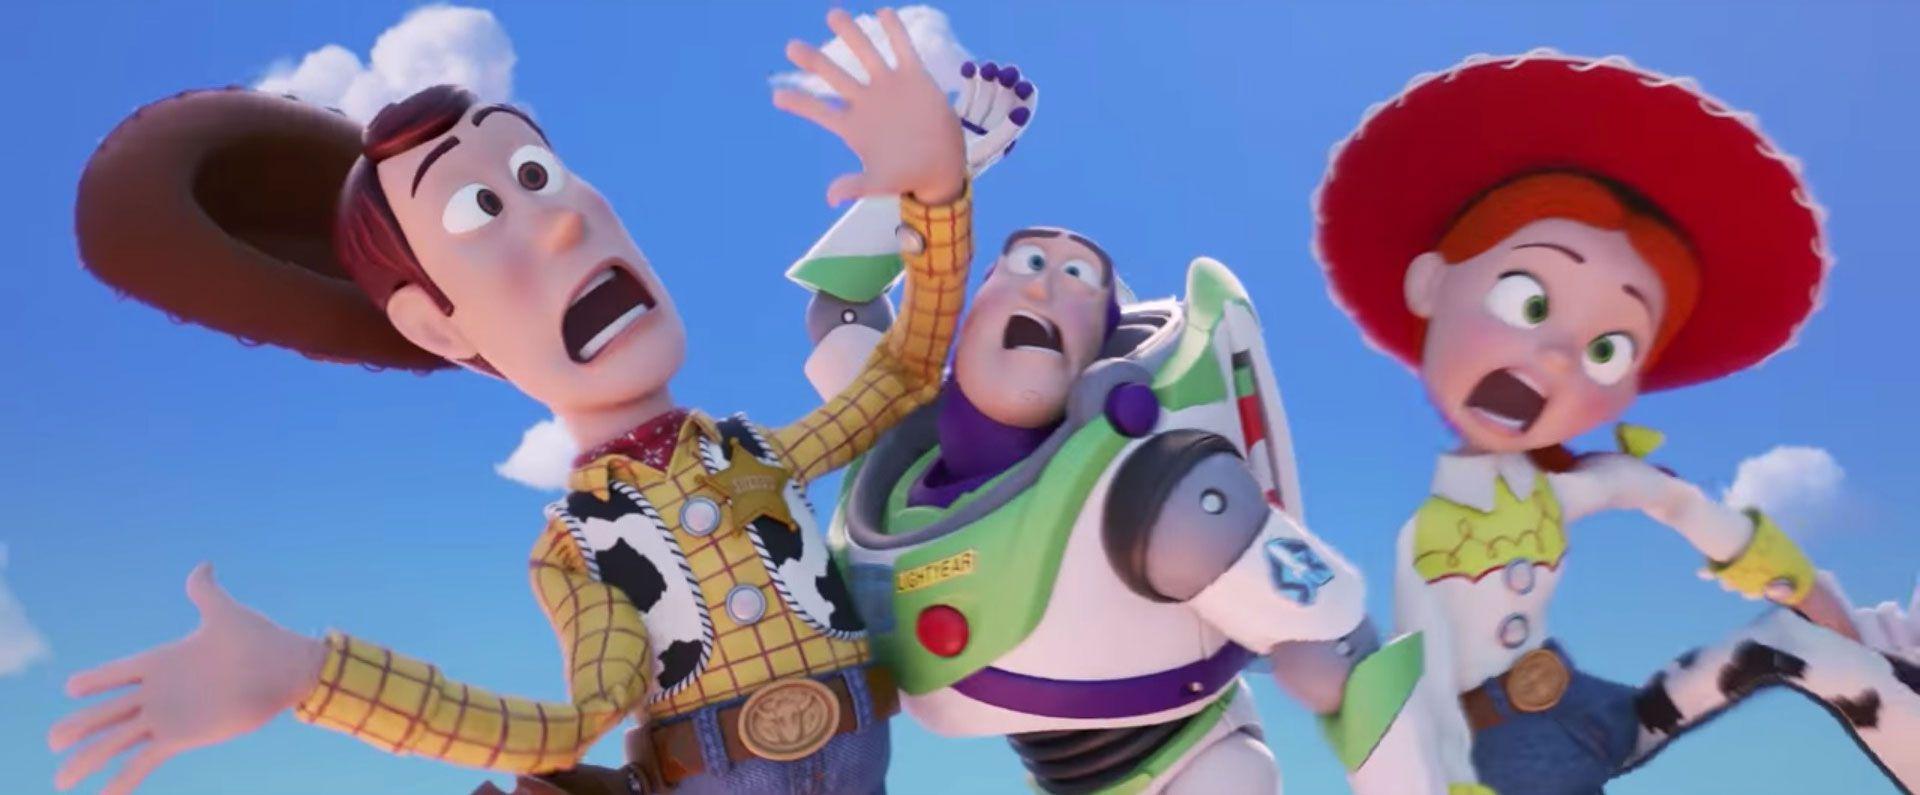 Toy Story 4 trailer and Buzz Lightyear return with odd new